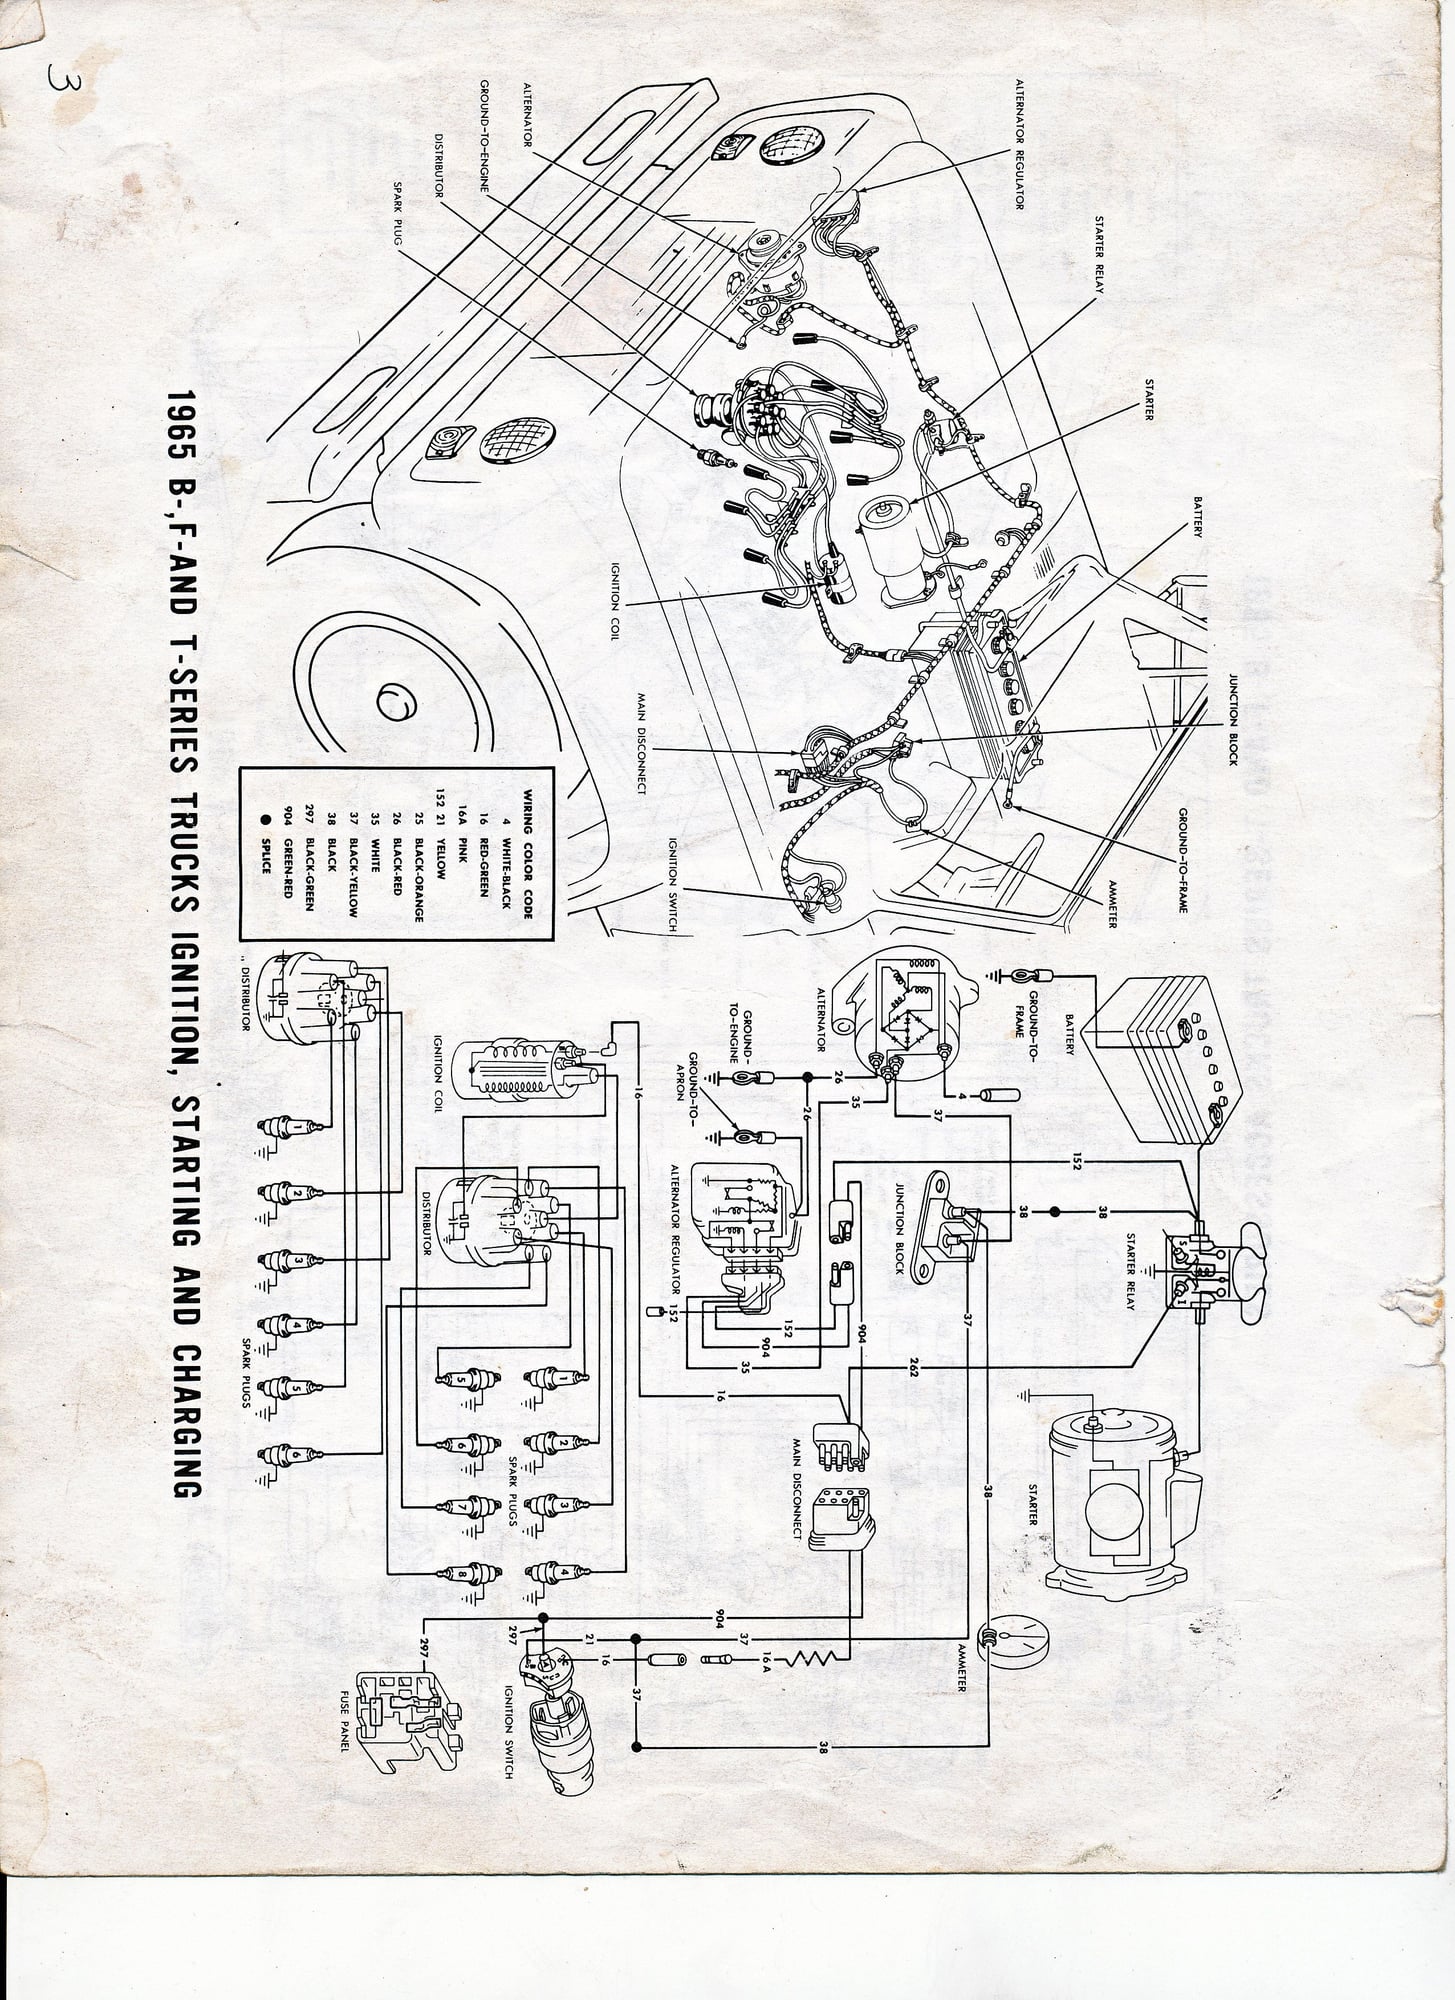 wires from alternator to voltage regulator. - Ford Truck Enthusiasts Forums  1966 Ford Alternator Wiring Diagram    Ford Truck Enthusiasts